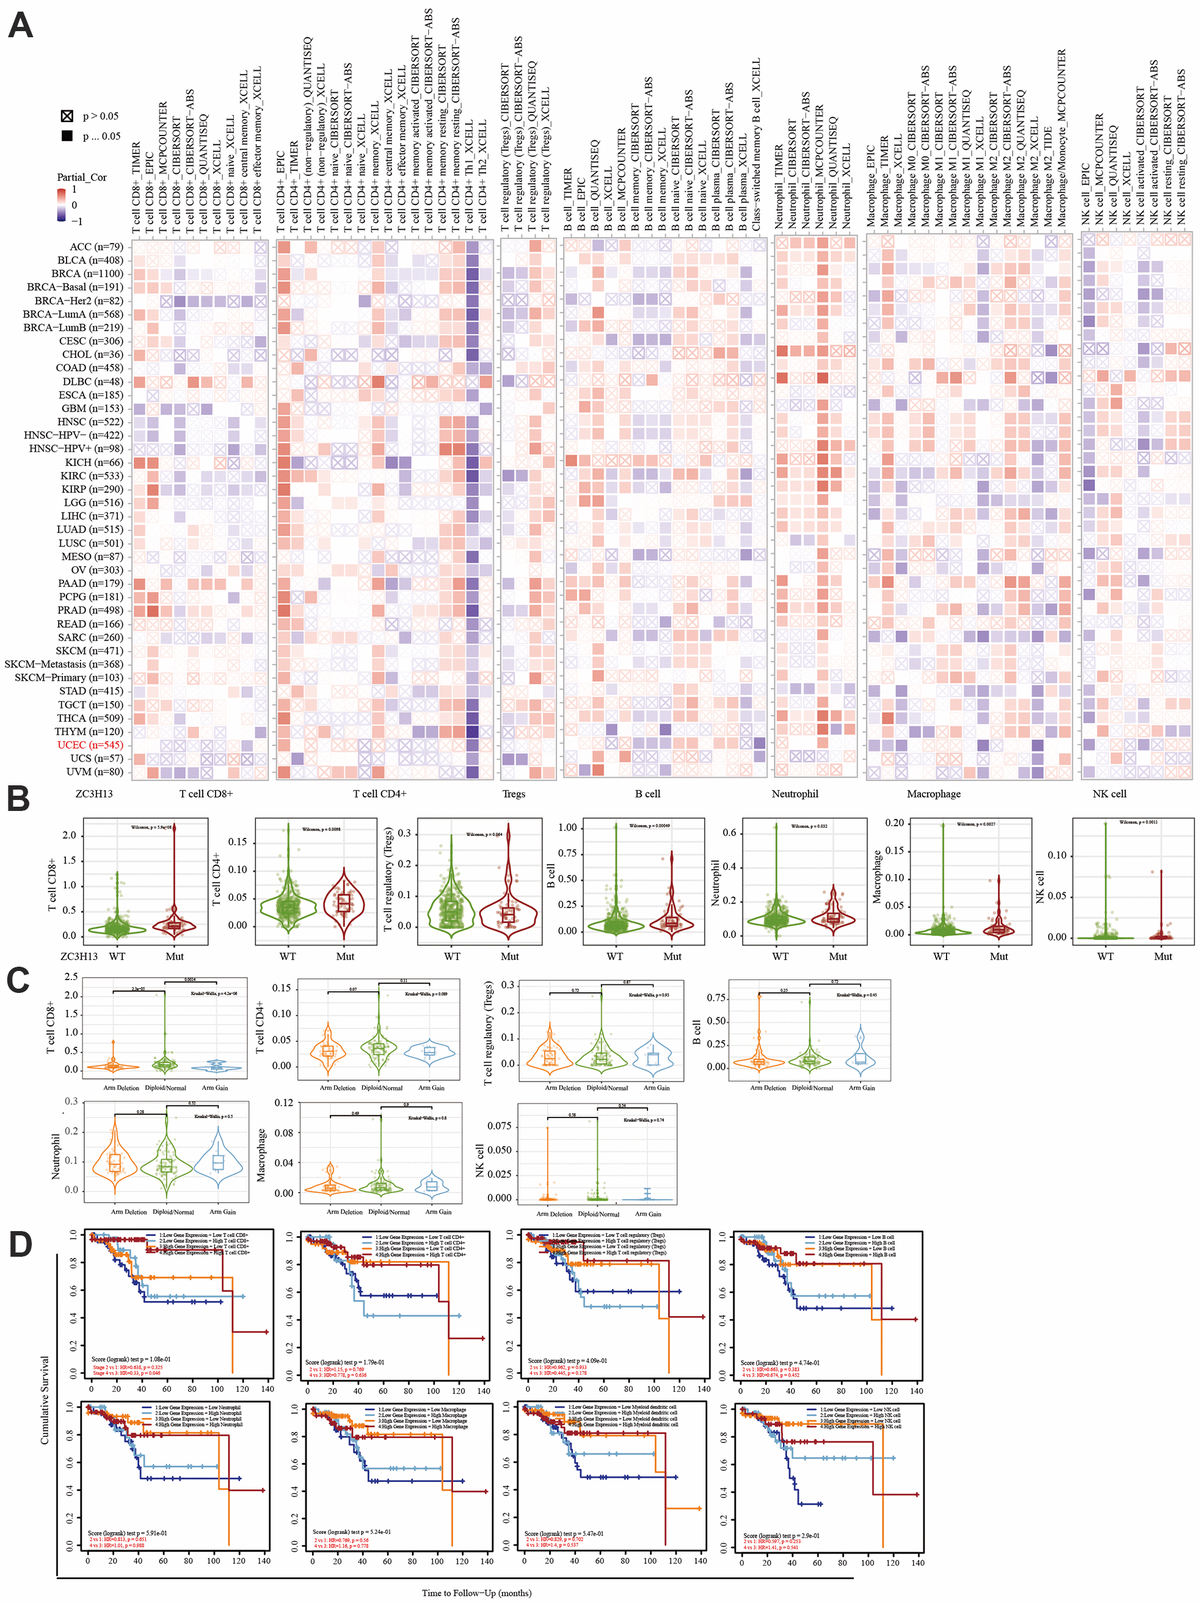 Correlation between immune infiltration level and the expression, mutation, SCNA status, and outcome module of ZC3H13. (A) Heatmap depicting the correlation of ZC3H13 expression with immune infiltration level in diverse cancer types. (B) Violin plots examining the effect of ZC3H13 gene mutations on immune cell infiltration and immune cell types in endometrial cancer. (C) Violin plots depicting the effect of ZC3H13 gene SCNA status on immune cell infiltration and immune cell types in endometrial cancer. (D) Outcome module showing the clinical relevance of tumor immune subsets.